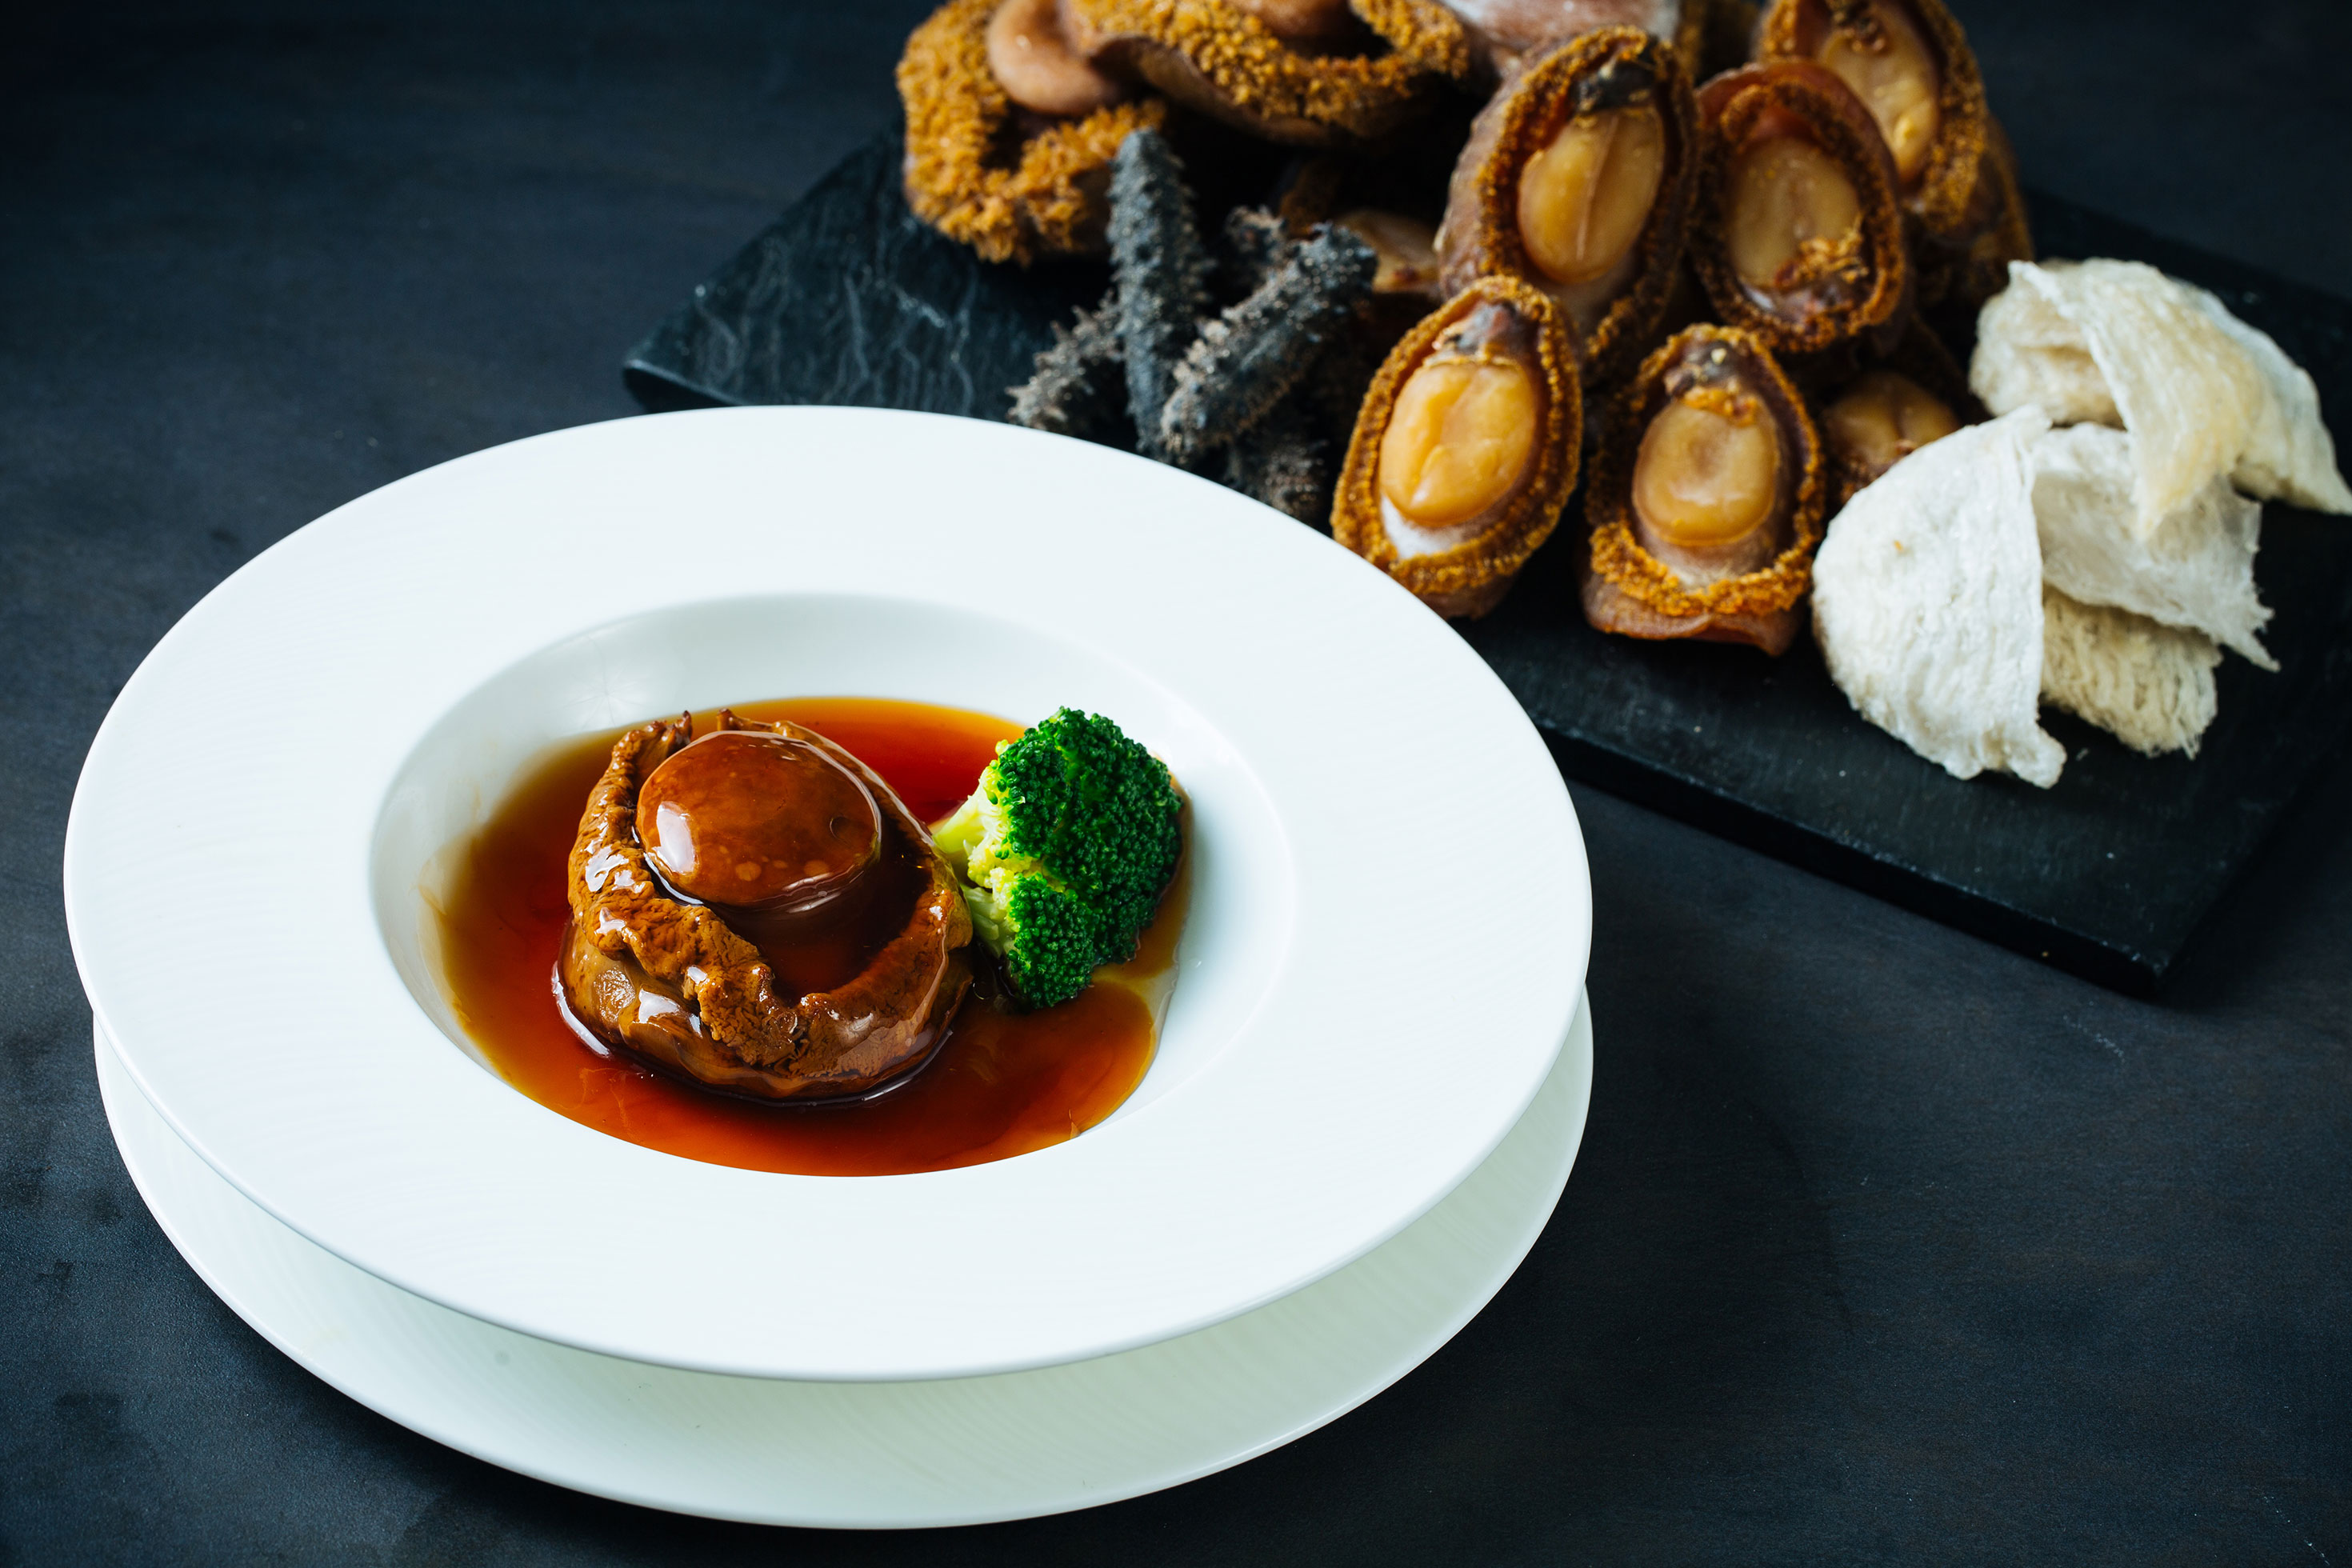 Braised Whole South African Abalone with Oyster Sauce